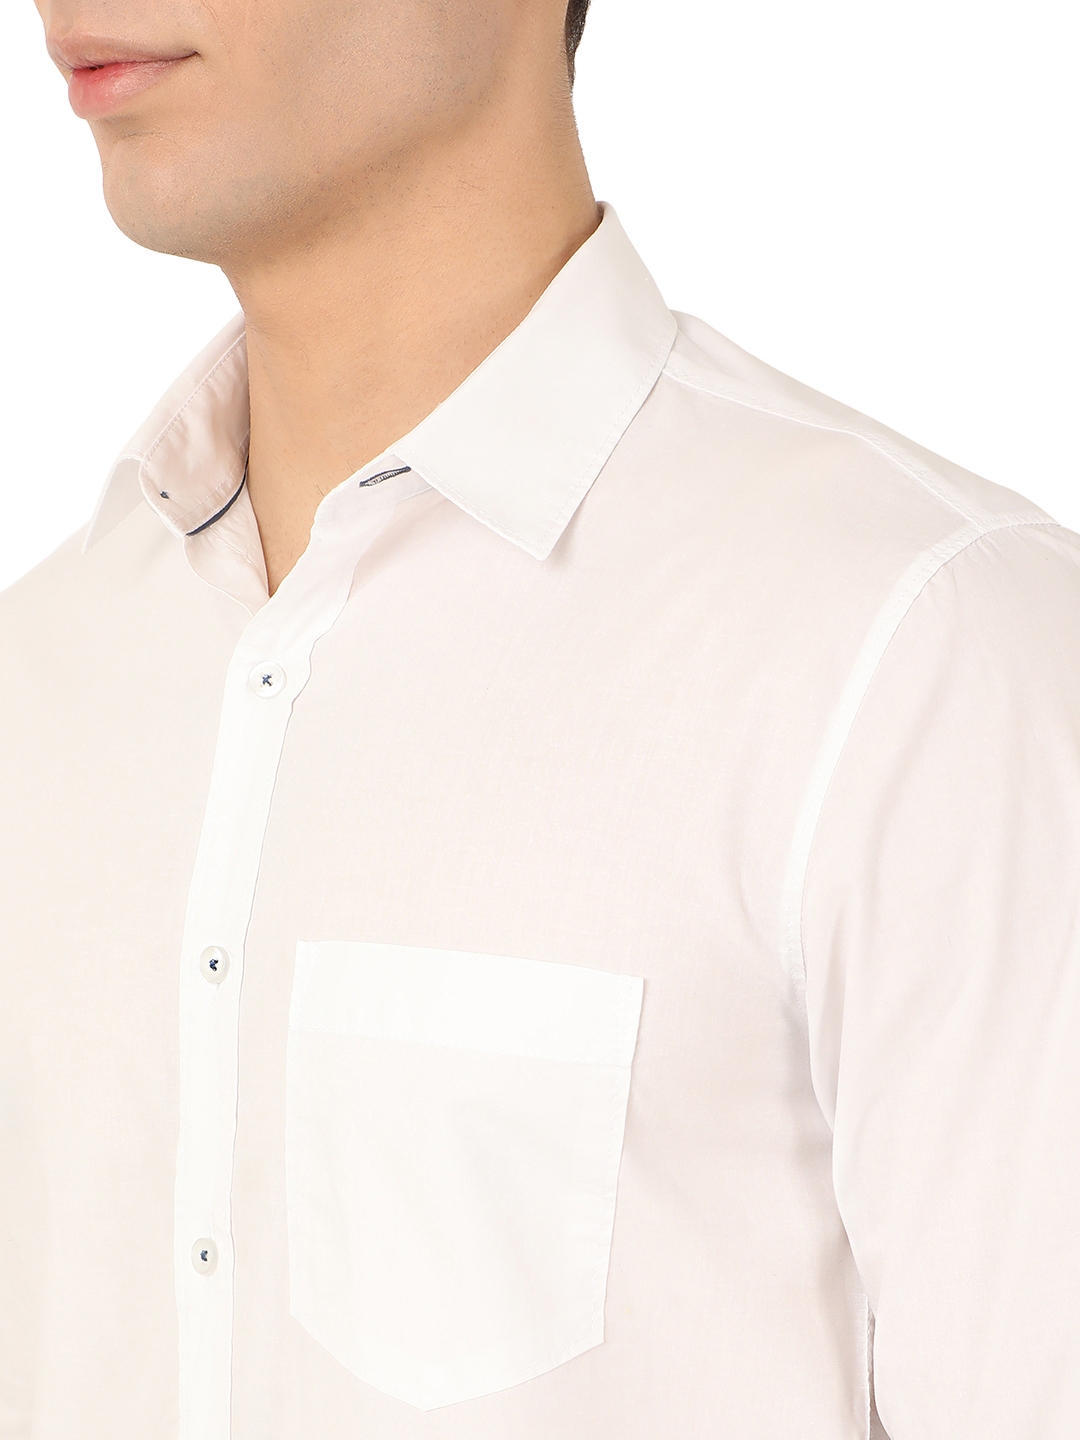 Greenfibre | Bright White Solid Slim Fit Semi Casual Shirt | Greenfibre 4